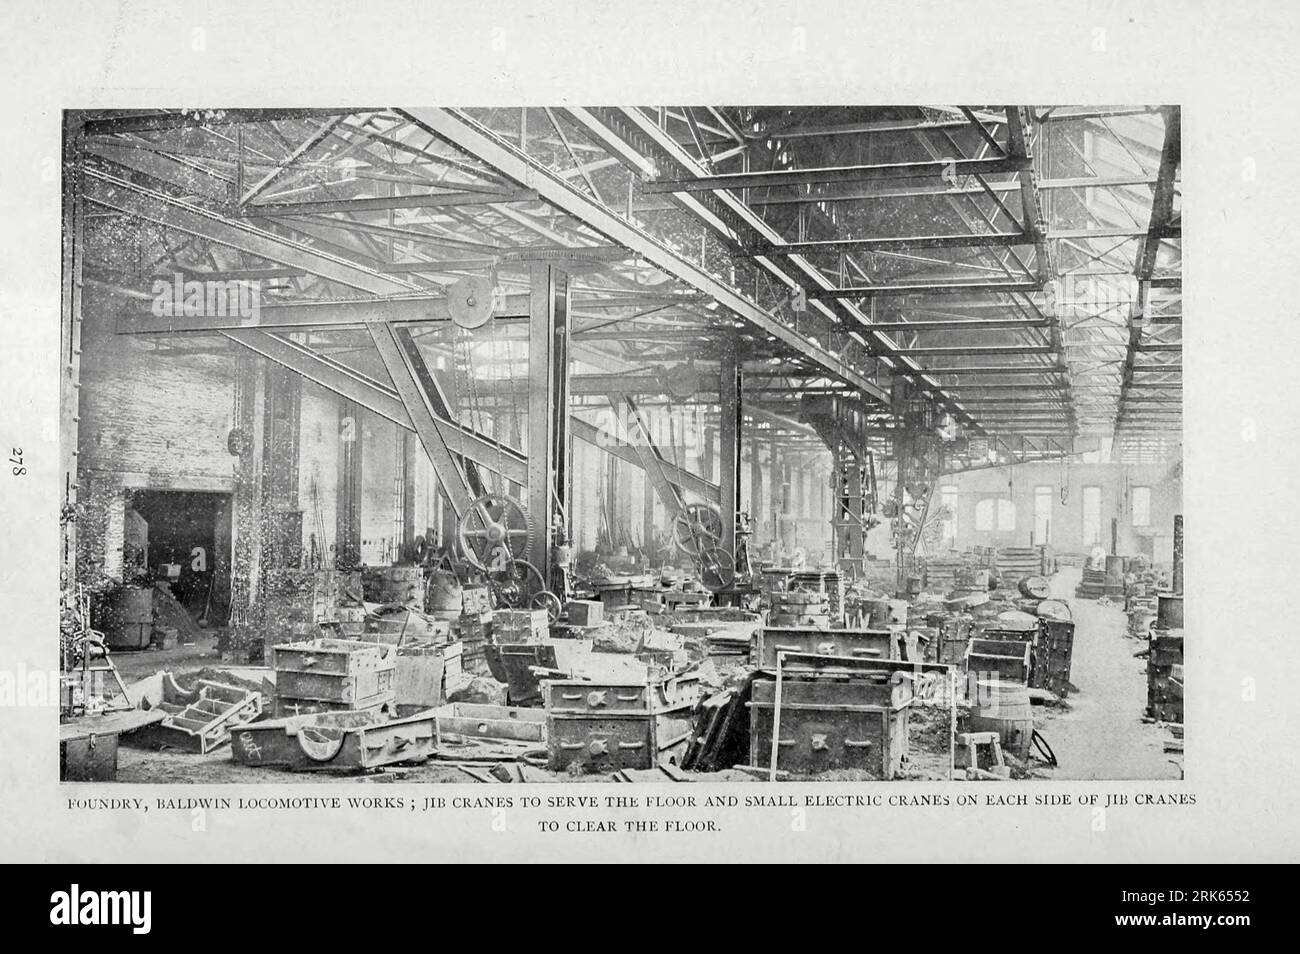 Foundry Baldwin Locomotive Works Jib Cranes to serve the floor and small electric cranes on each side of Jib Cranes from the Article MODERN MACHINE-SHOP ECONOMICS PRIME REQUISITES OF SHOP CONSTRUCTION By Horace L. Arnold from The Engineering Magazine DEVOTED TO INDUSTRIAL PROGRESS Volume XI October 1896 NEW YORK The Engineering Magazine Co Stock Photo